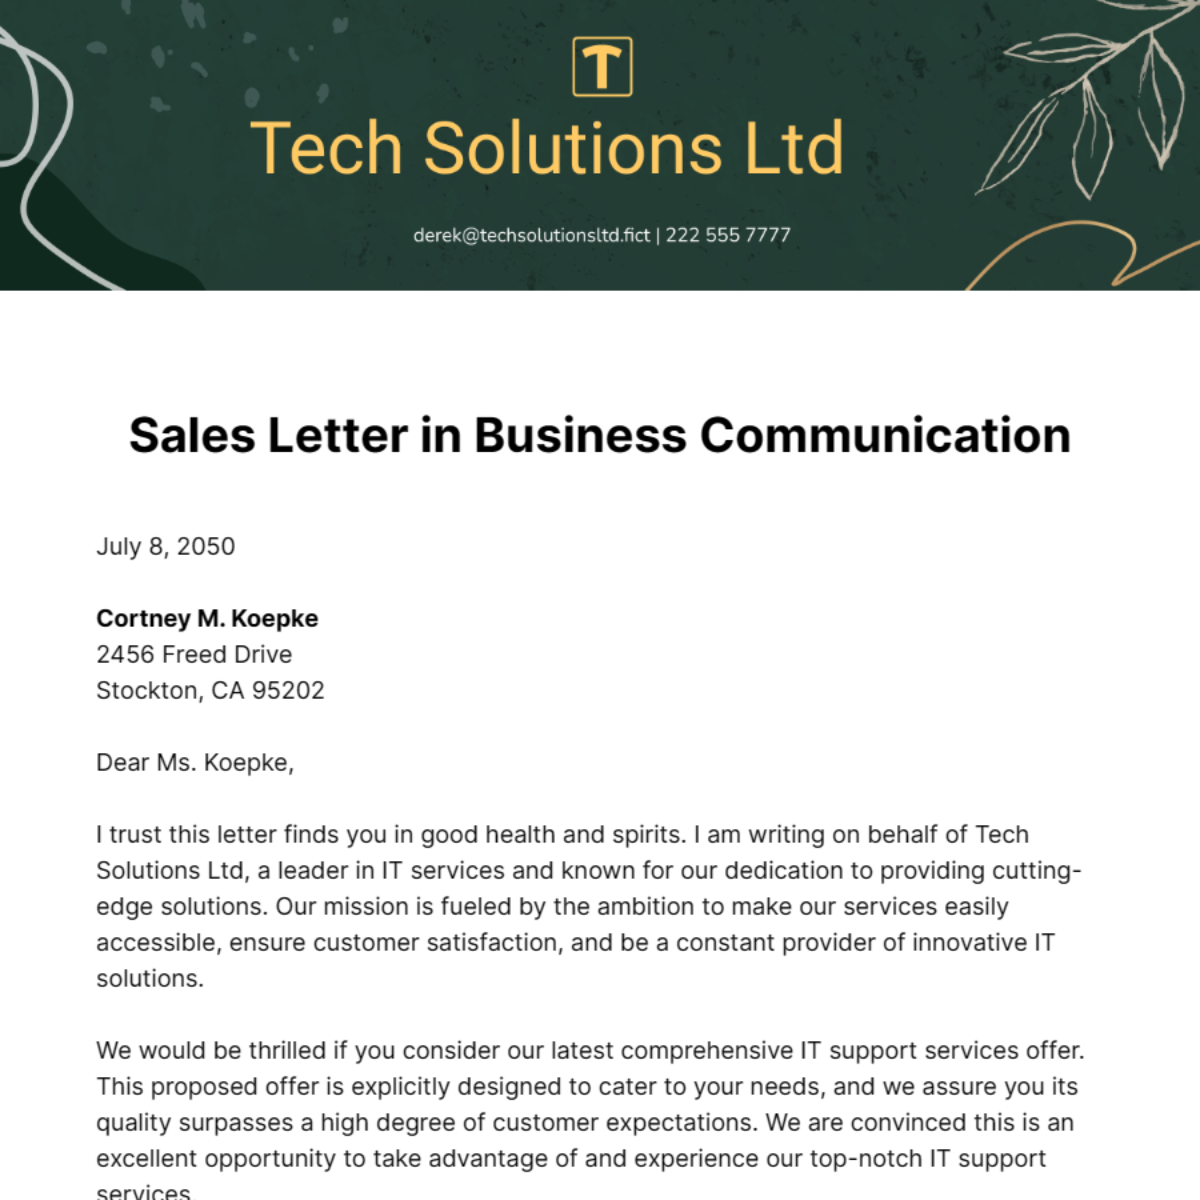 Sales Letter in Business Communication Template